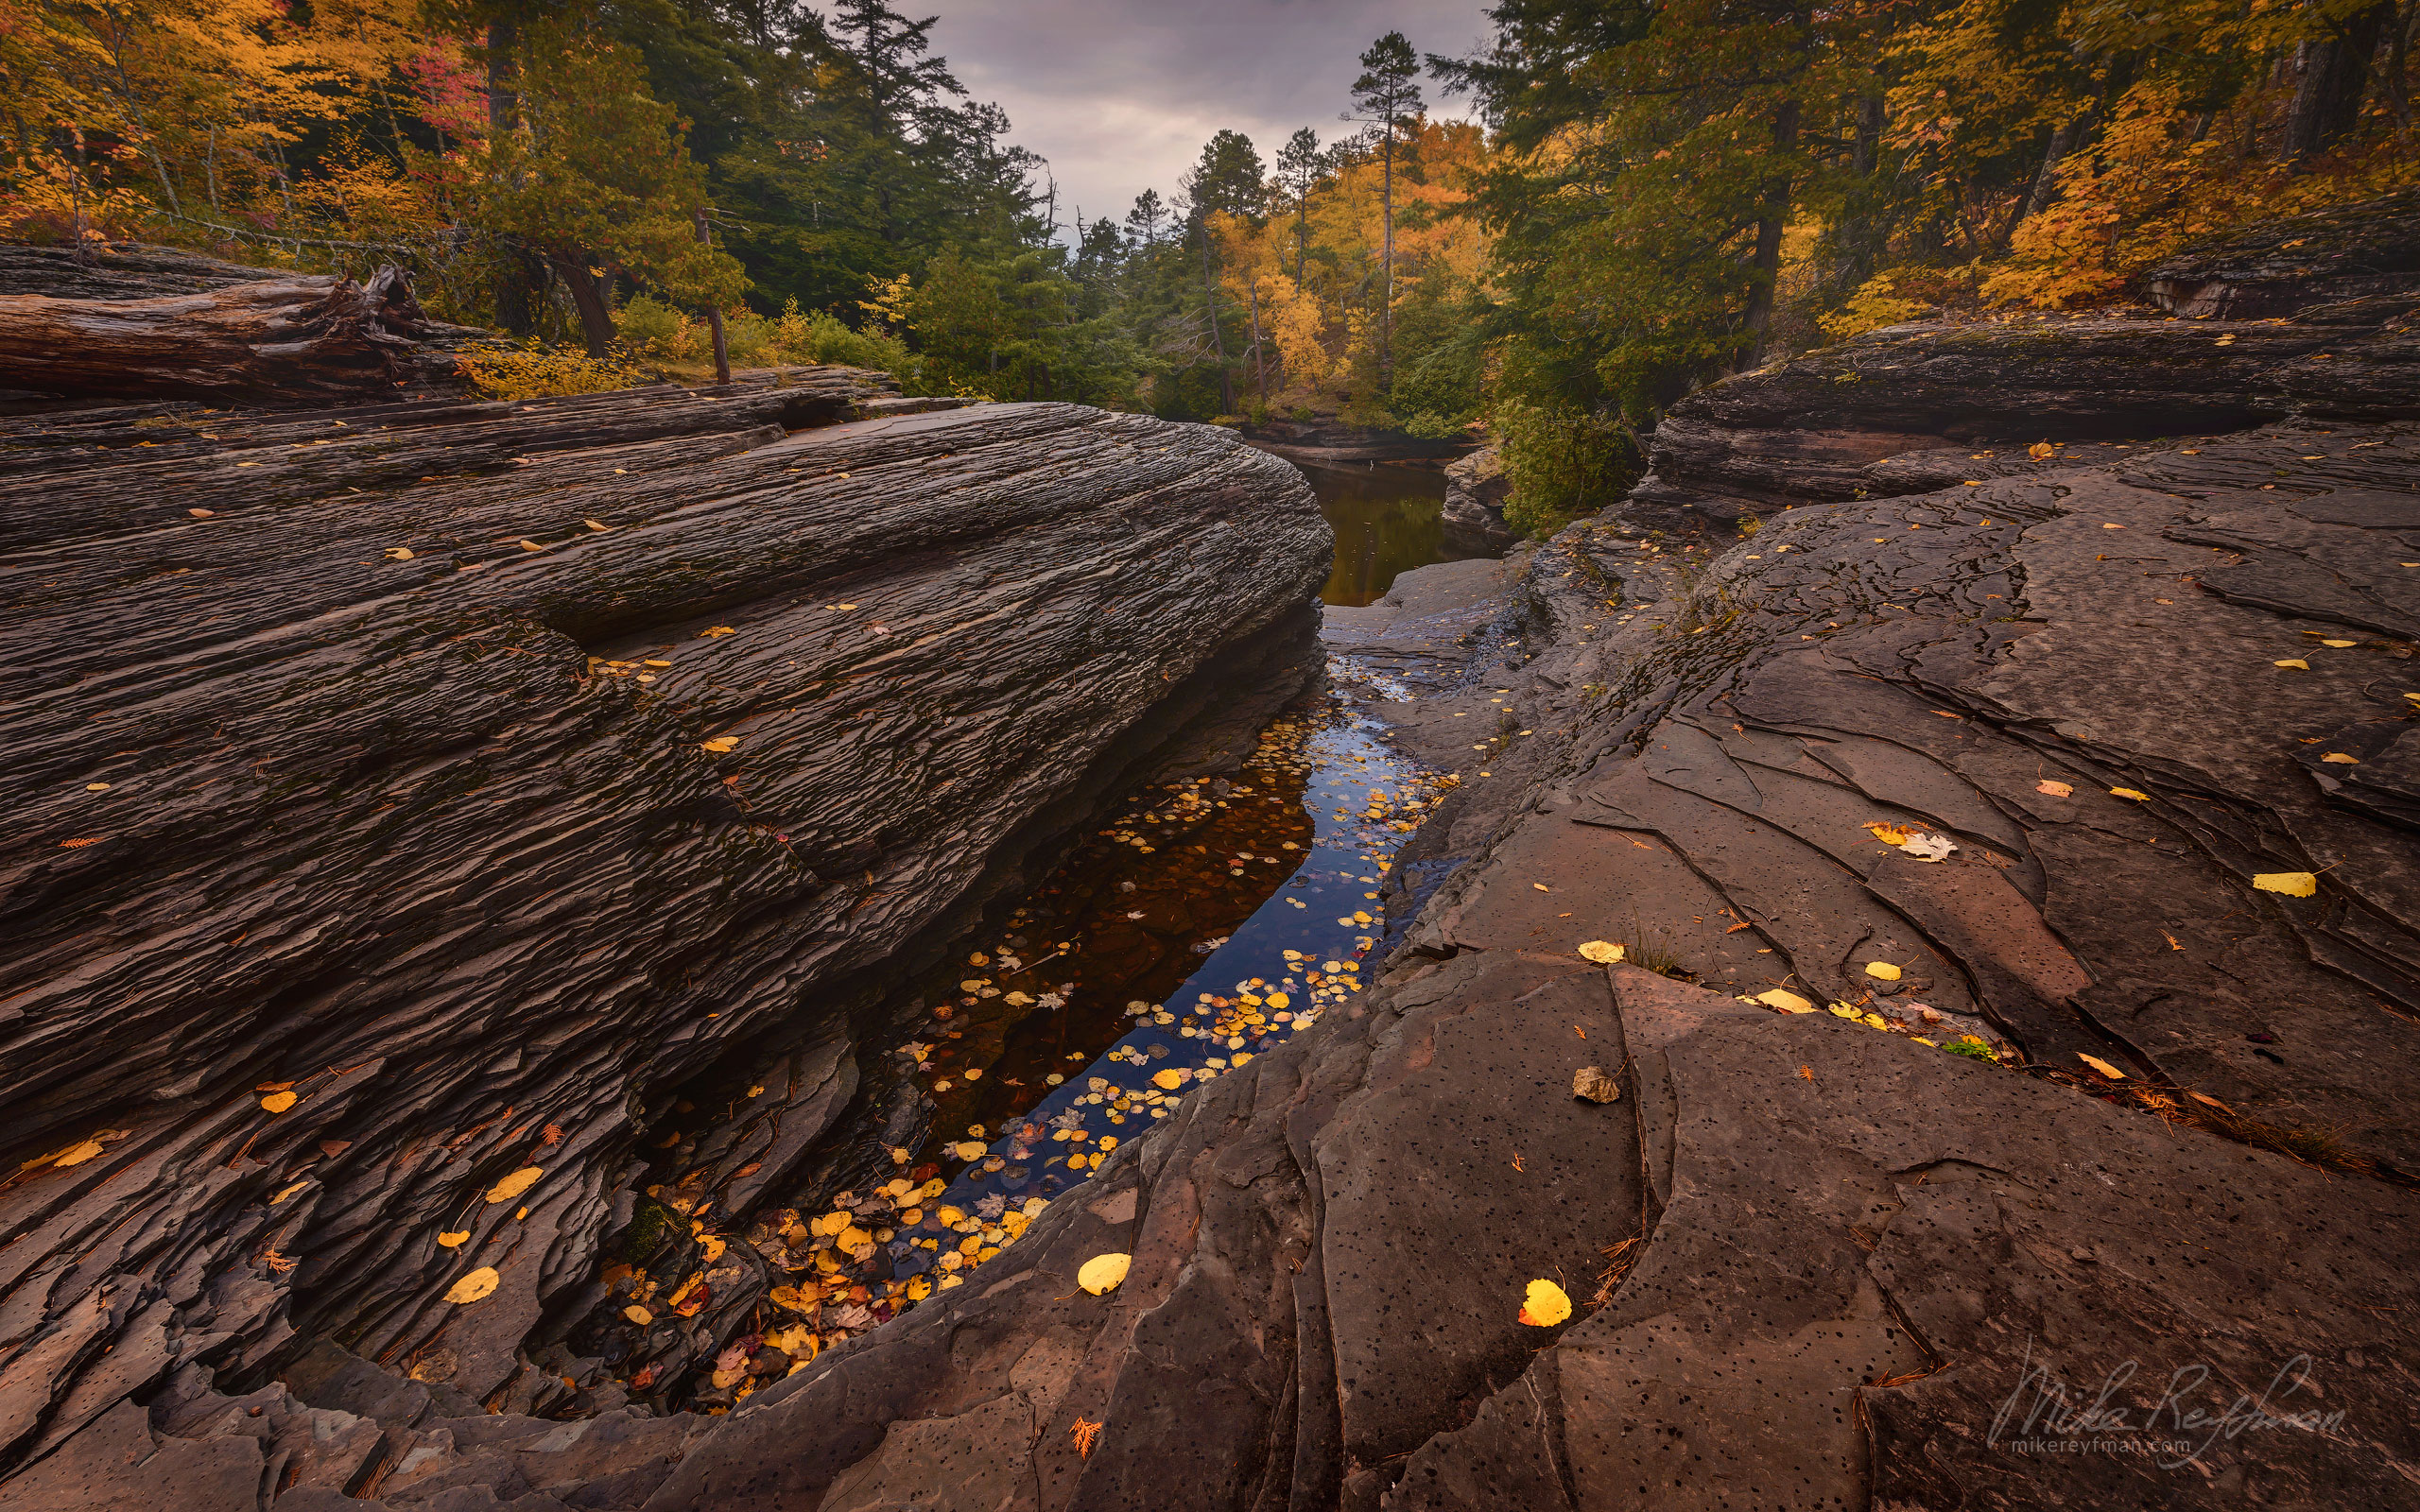 Presque Isle River, Porcupine Mountains, Upper Peninsula, Michigan, USA. UP-MI_028_ZRA8057.jpg - Michigan's Upper Peninsula - the best destination in US for fall colors. - Mike Reyfman Photography